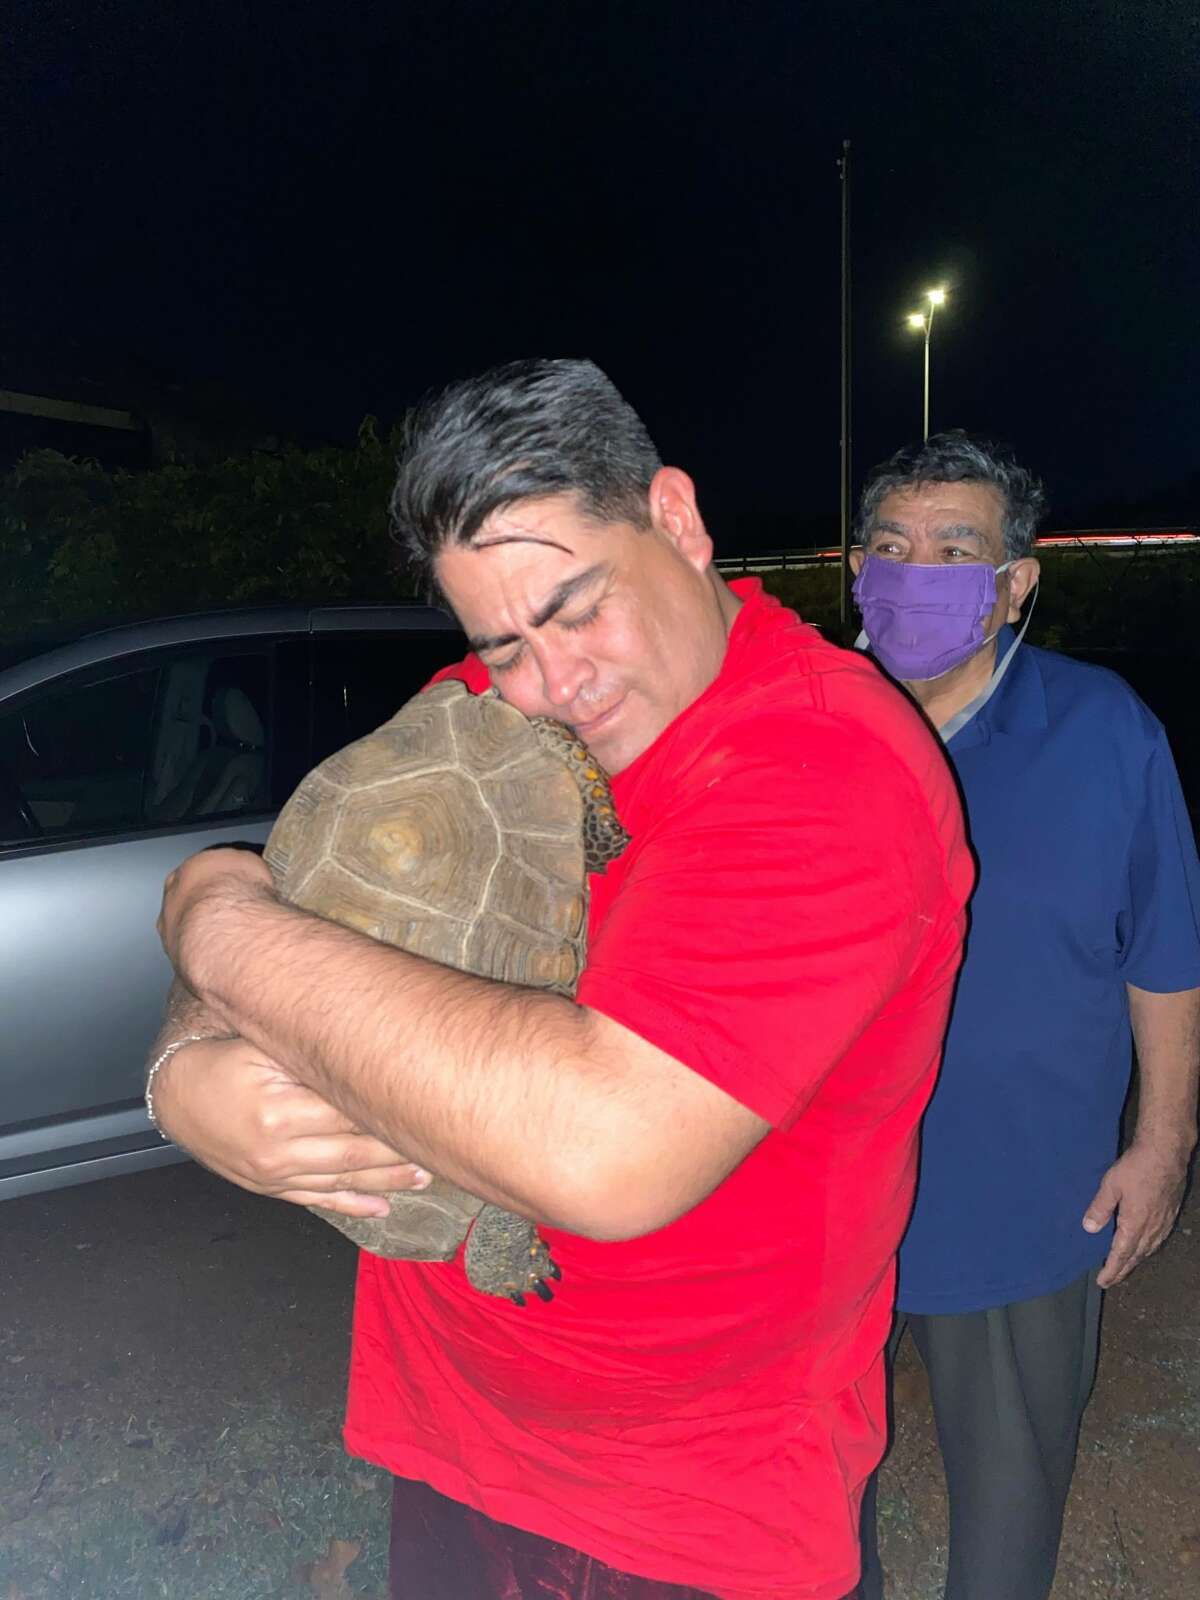 Diego, a 22-year-old rescue tortoise who went missing from his San Marcos backyard on Oct. 26, 2021, is reunited with his owner Daniel Guerrero on Dec. 3, 2021. Guerrero is a former mayor of San Marcos from 2010 to 2016.